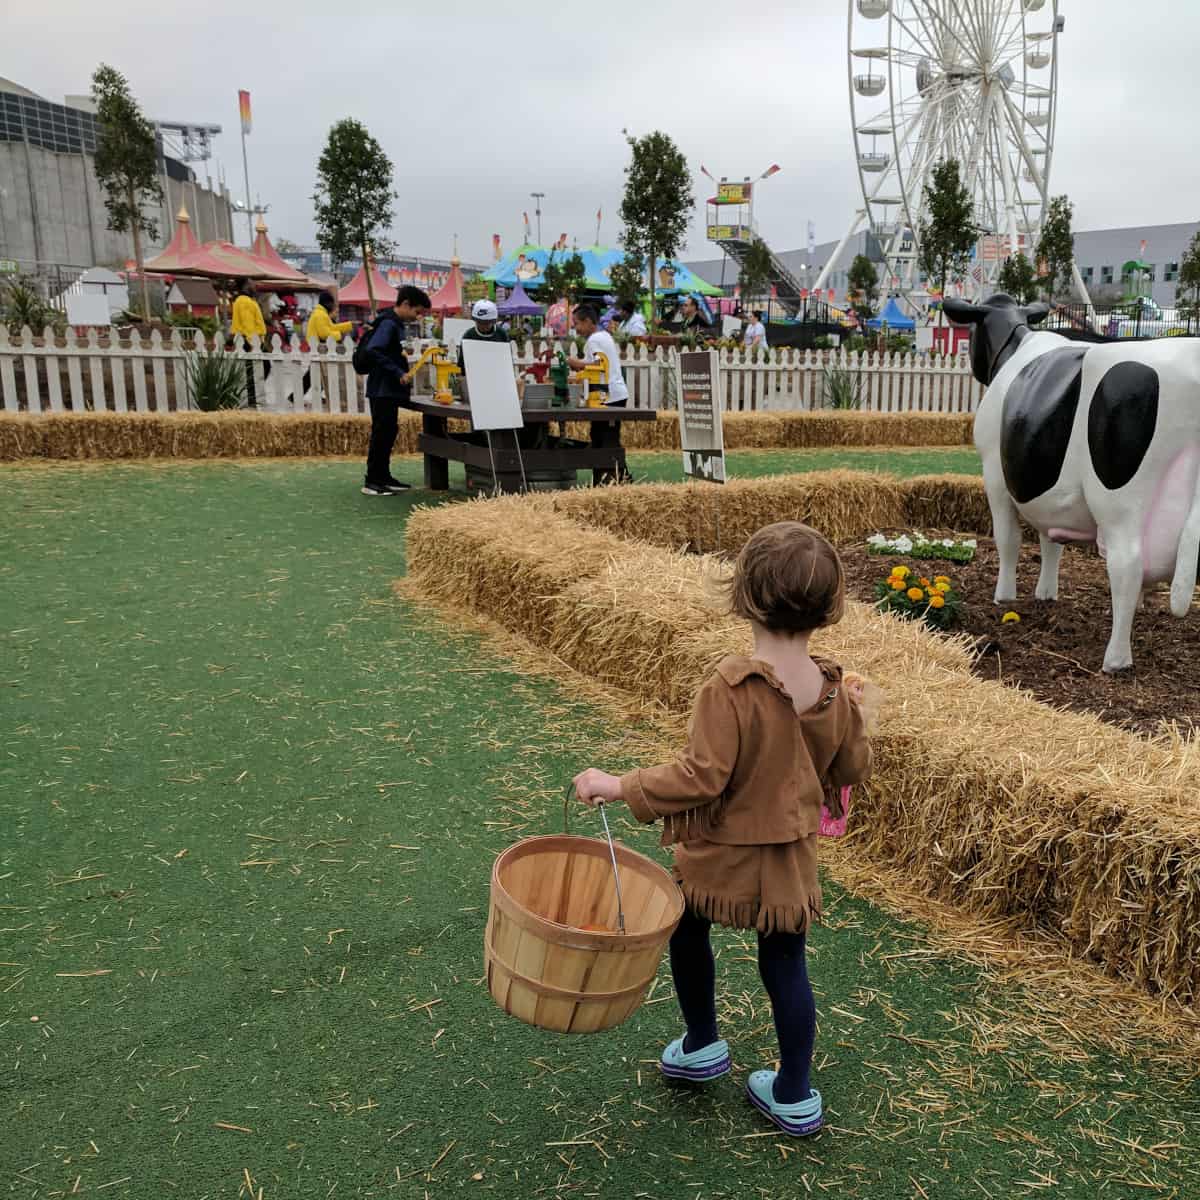 Girl Carrying Basket at Fun on the Farm Rodeo Houston